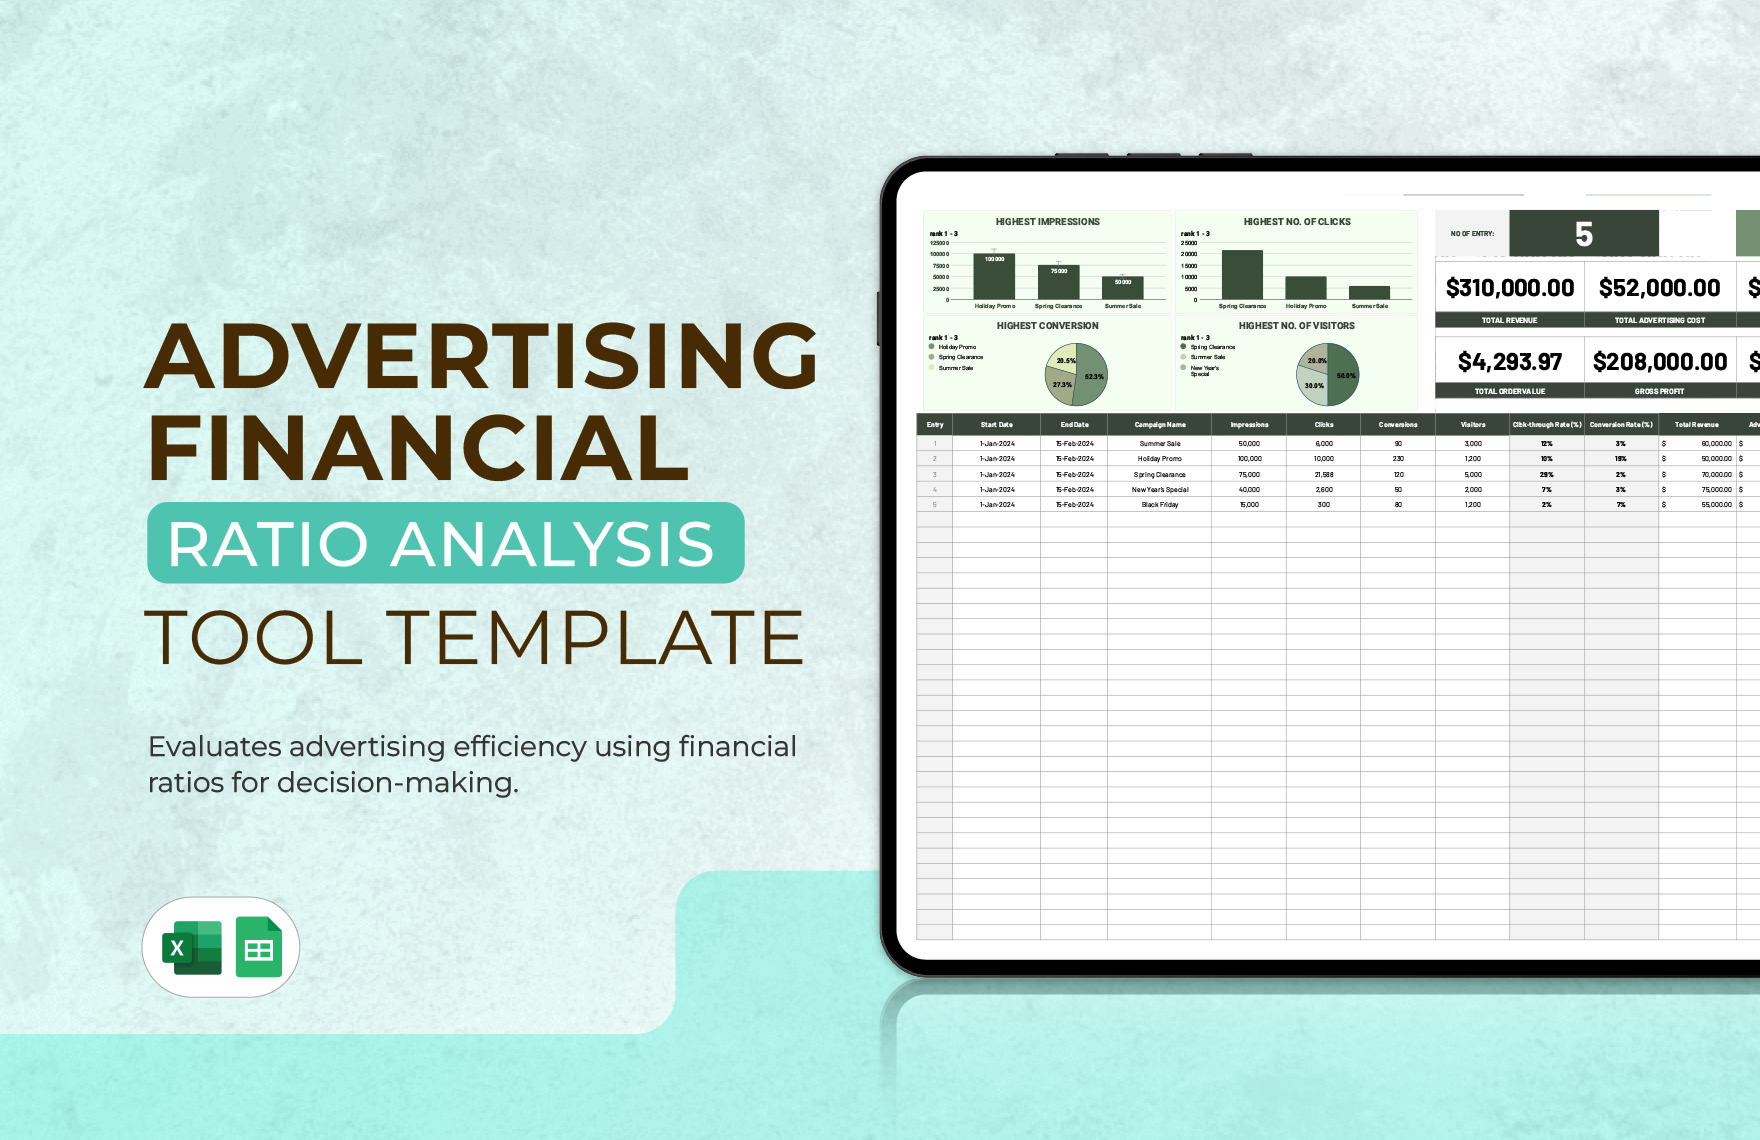 Advertising Financial Ratio Analysis Tool Template in Excel, Google Sheets